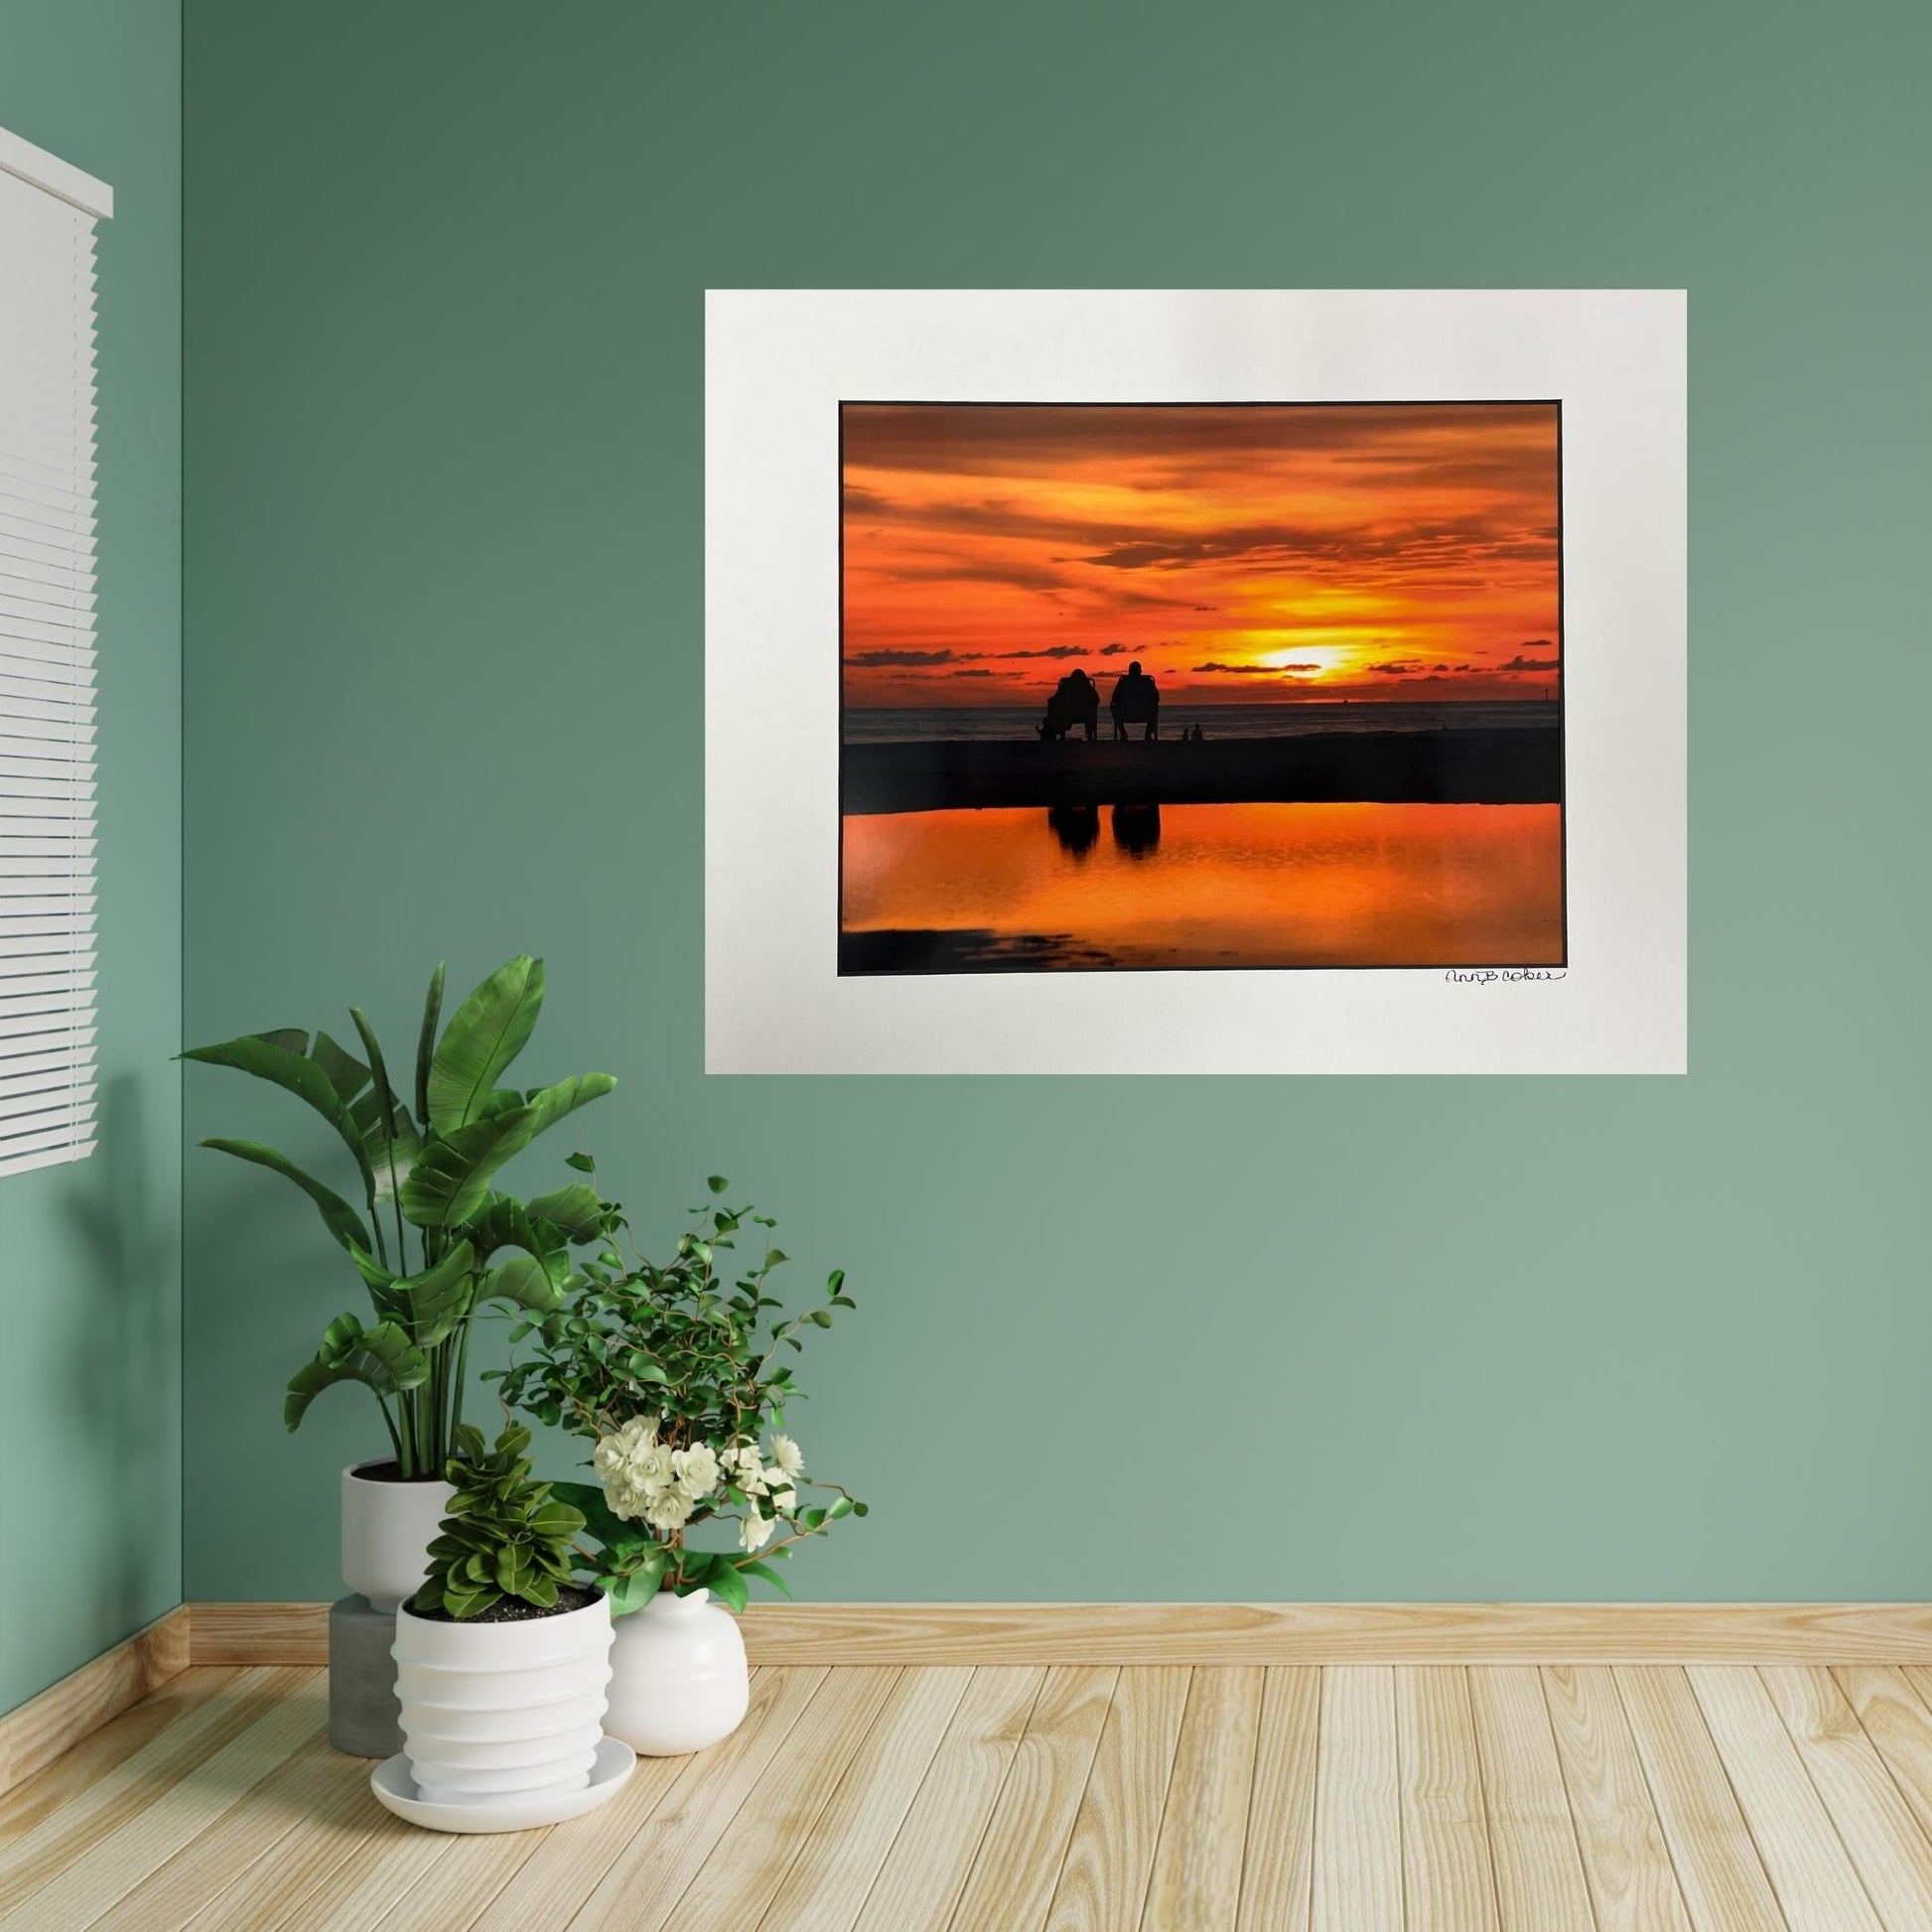 Two silhouetted people sitting in chairs on the water at Treasure Island with an orange sunset sky and reflection in the water. Shown in a white mat with a black core. Signed by the artist. Hanging in a room with a green wall and wood floor.